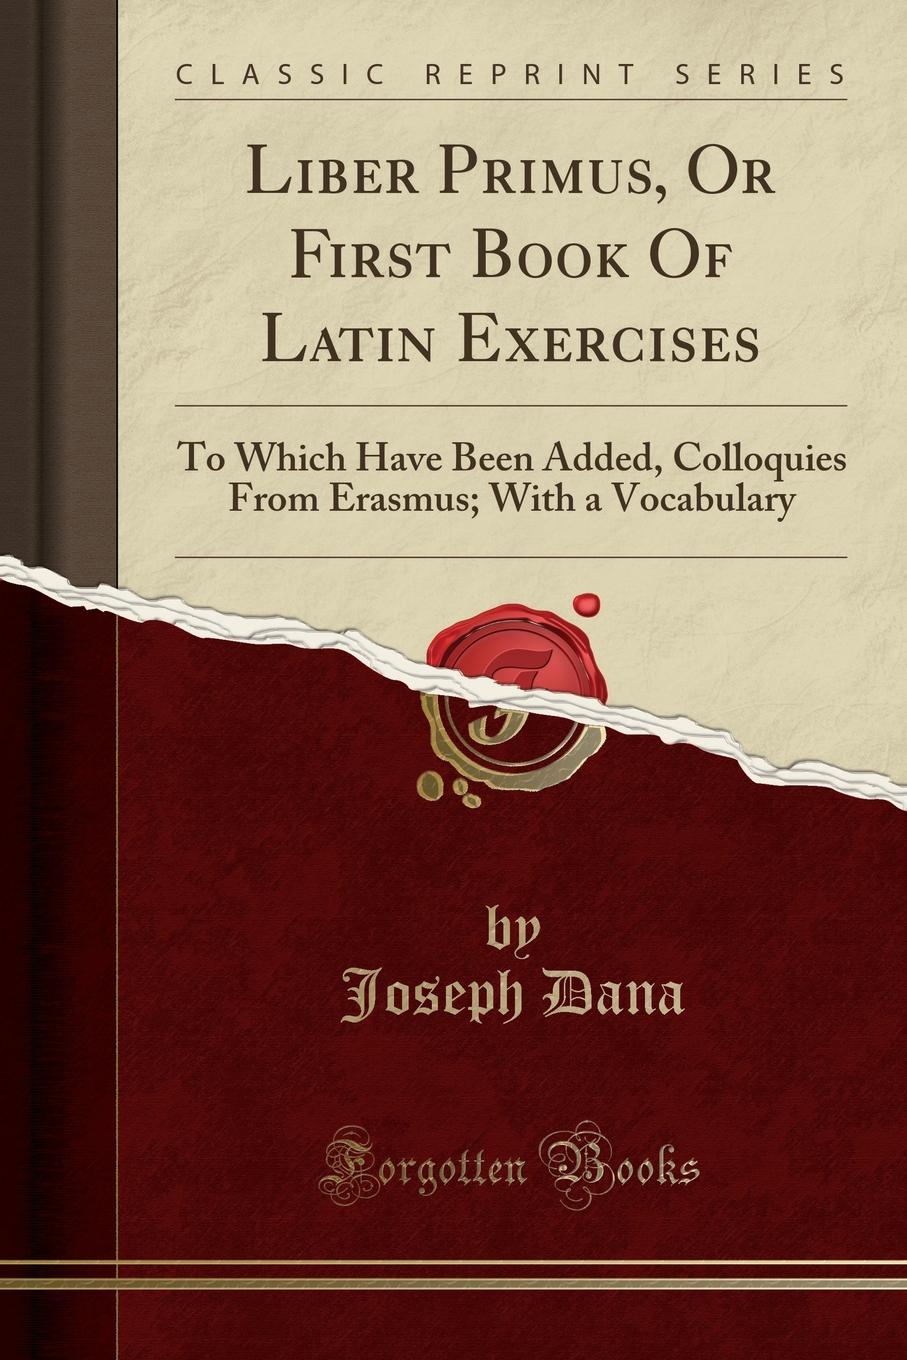 Liber Primus, Or First Book Of Latin Exercises. To Which Have Been Added, Colloquies From Erasmus; With a Vocabulary (Classic Reprint)